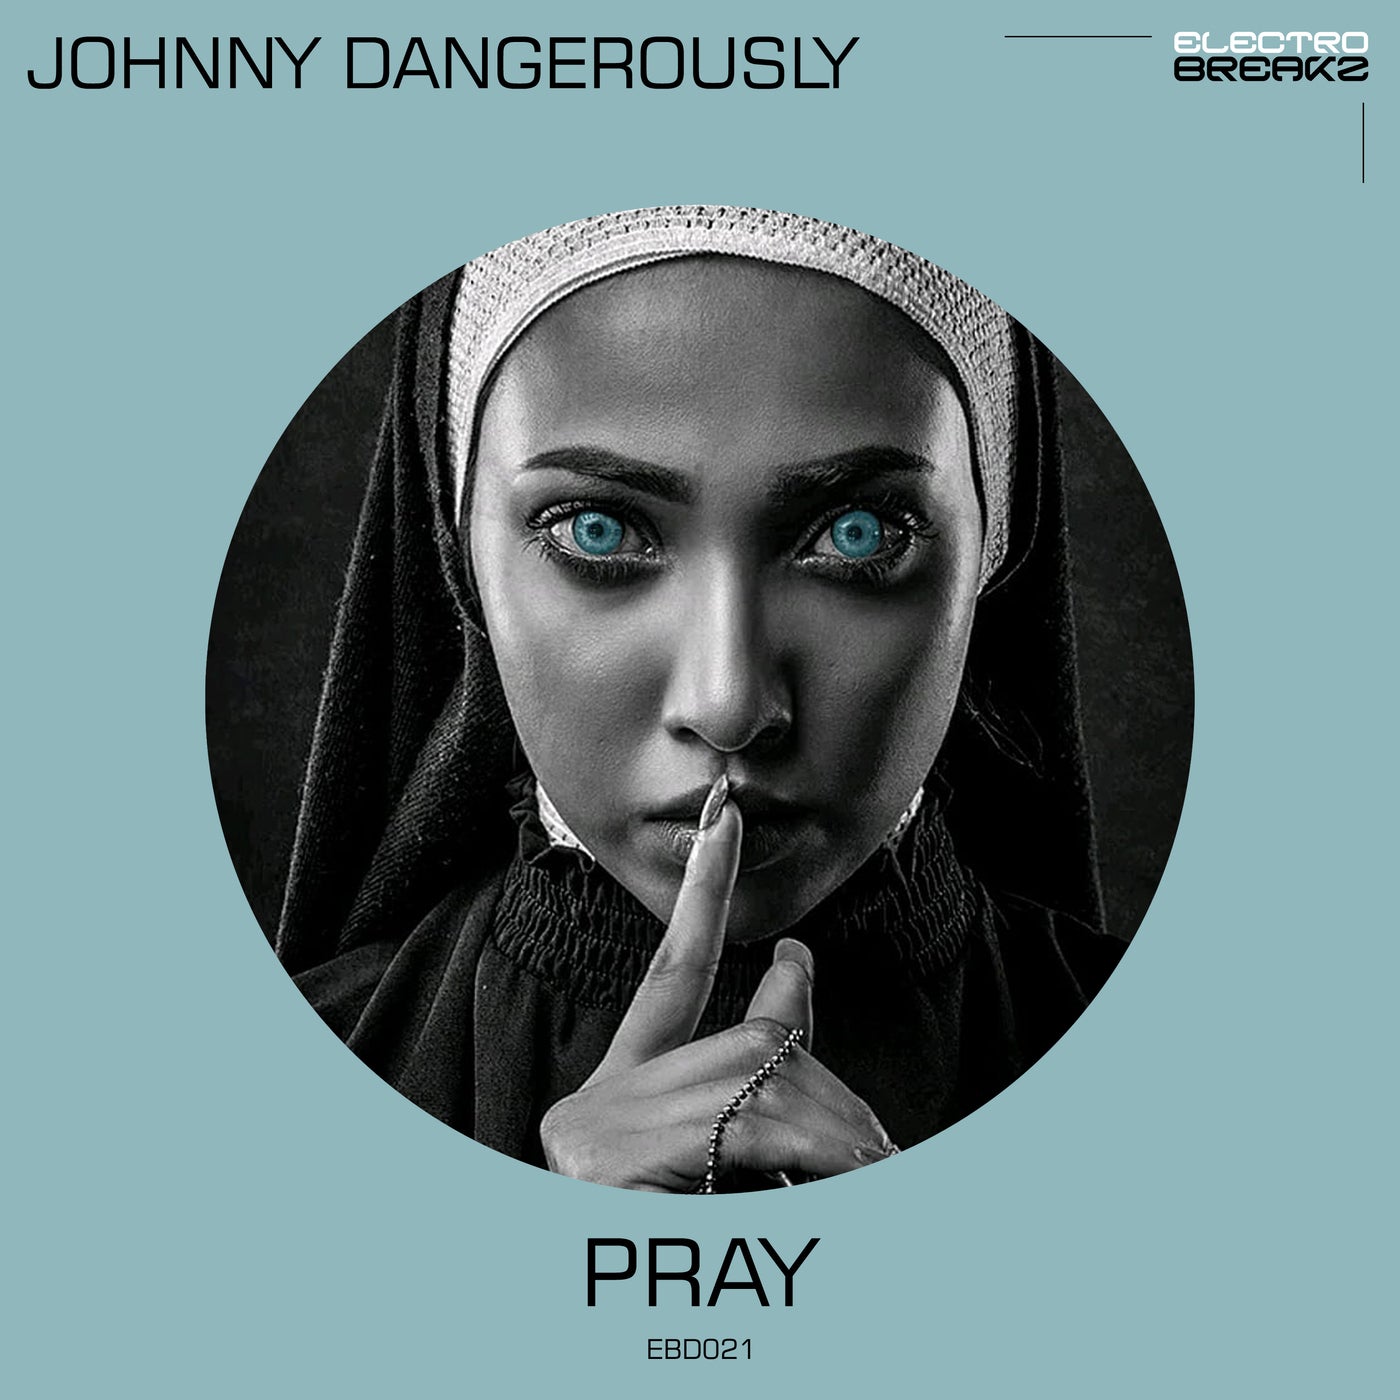 Johnny Dangerously Music & Downloads on Beatport